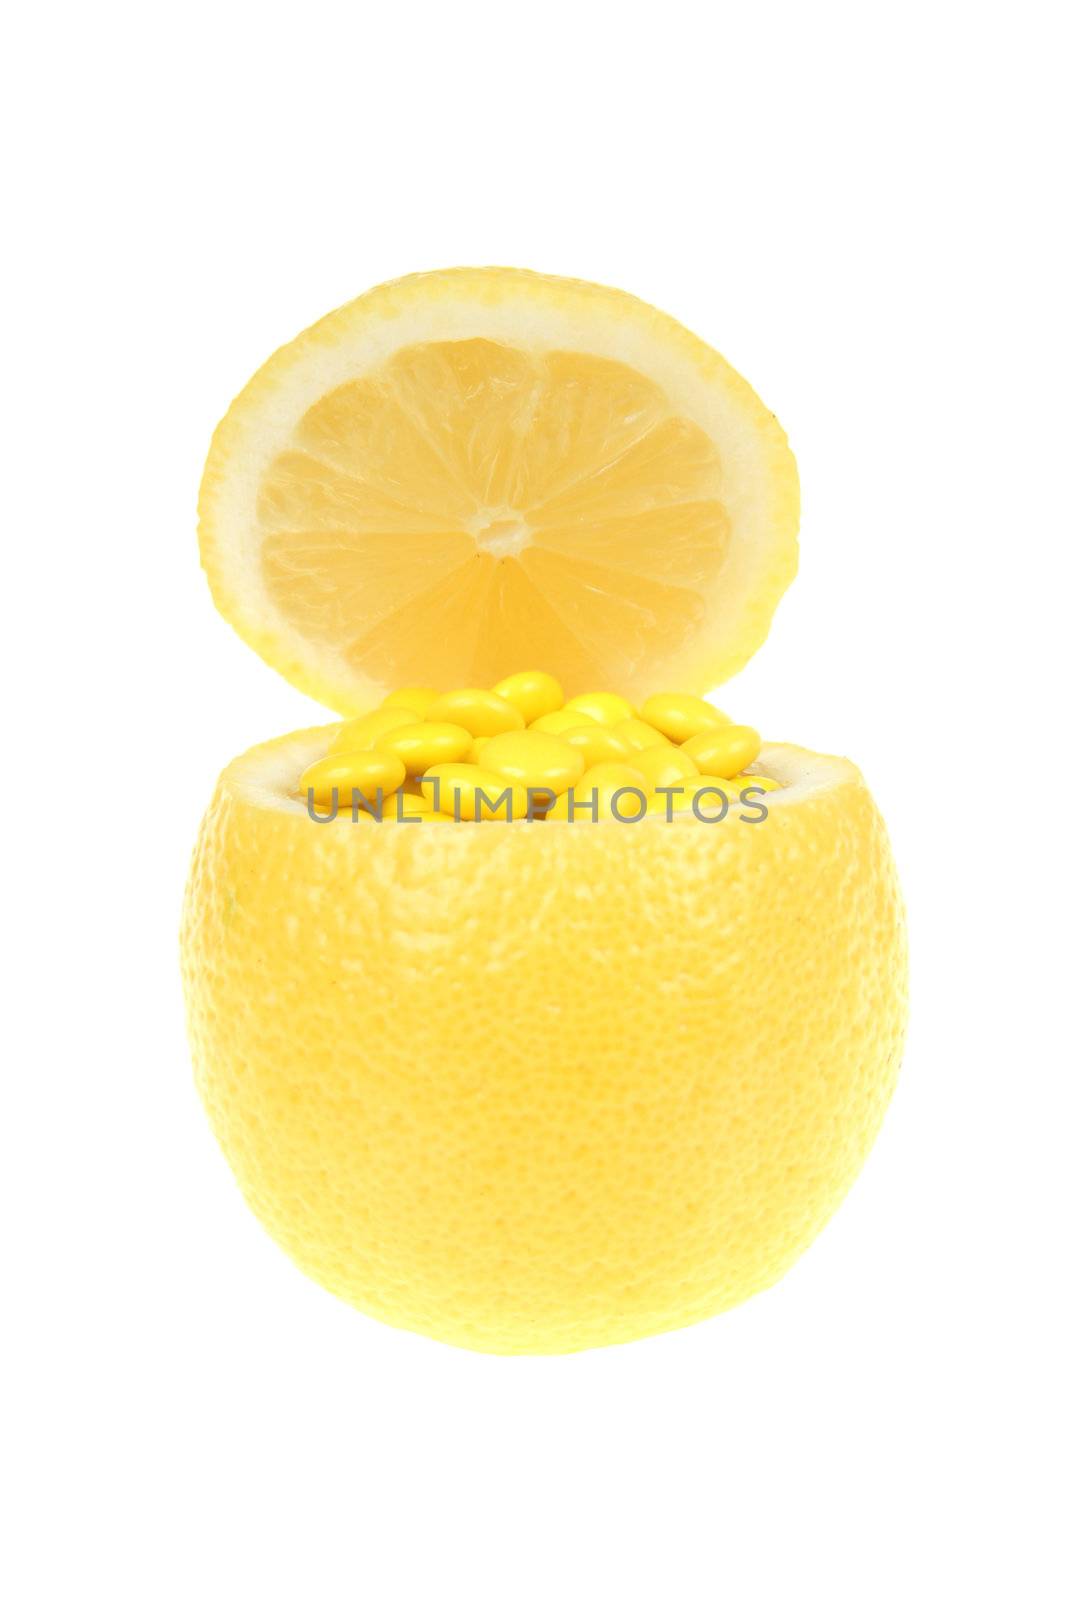 Lemon with vitamin C isolated on white with clipping path